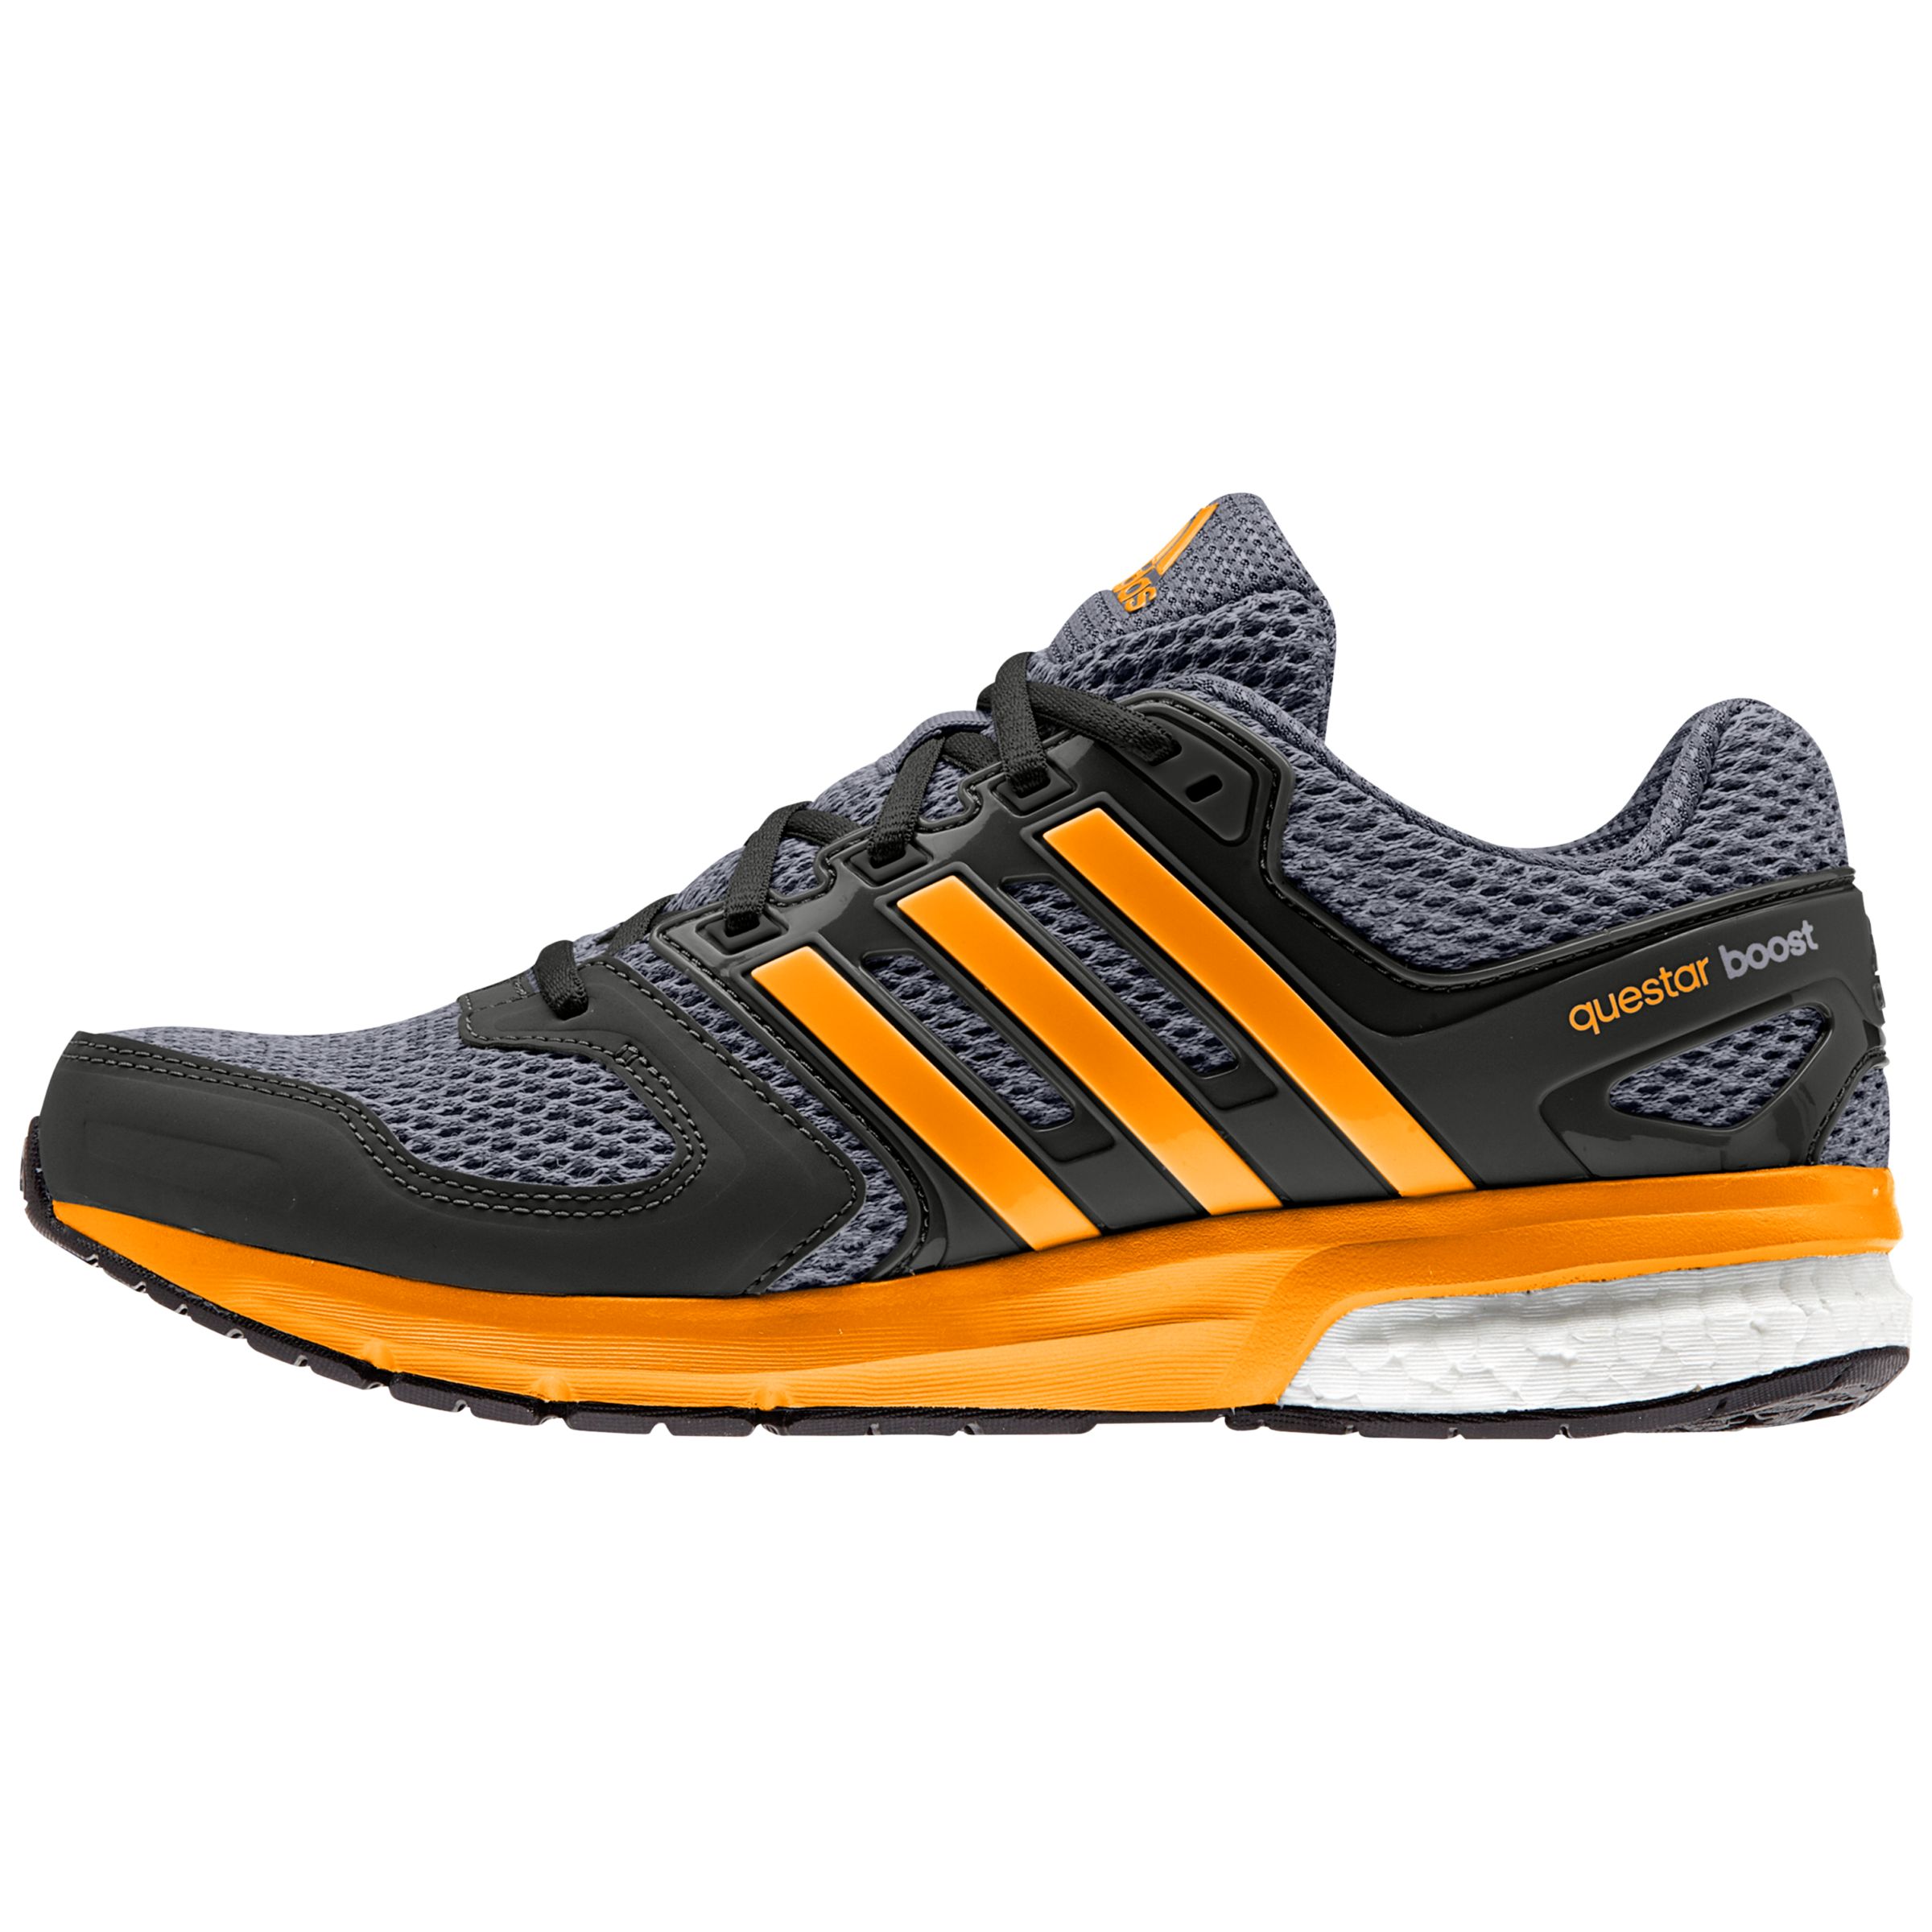 adidas boost mens trainers